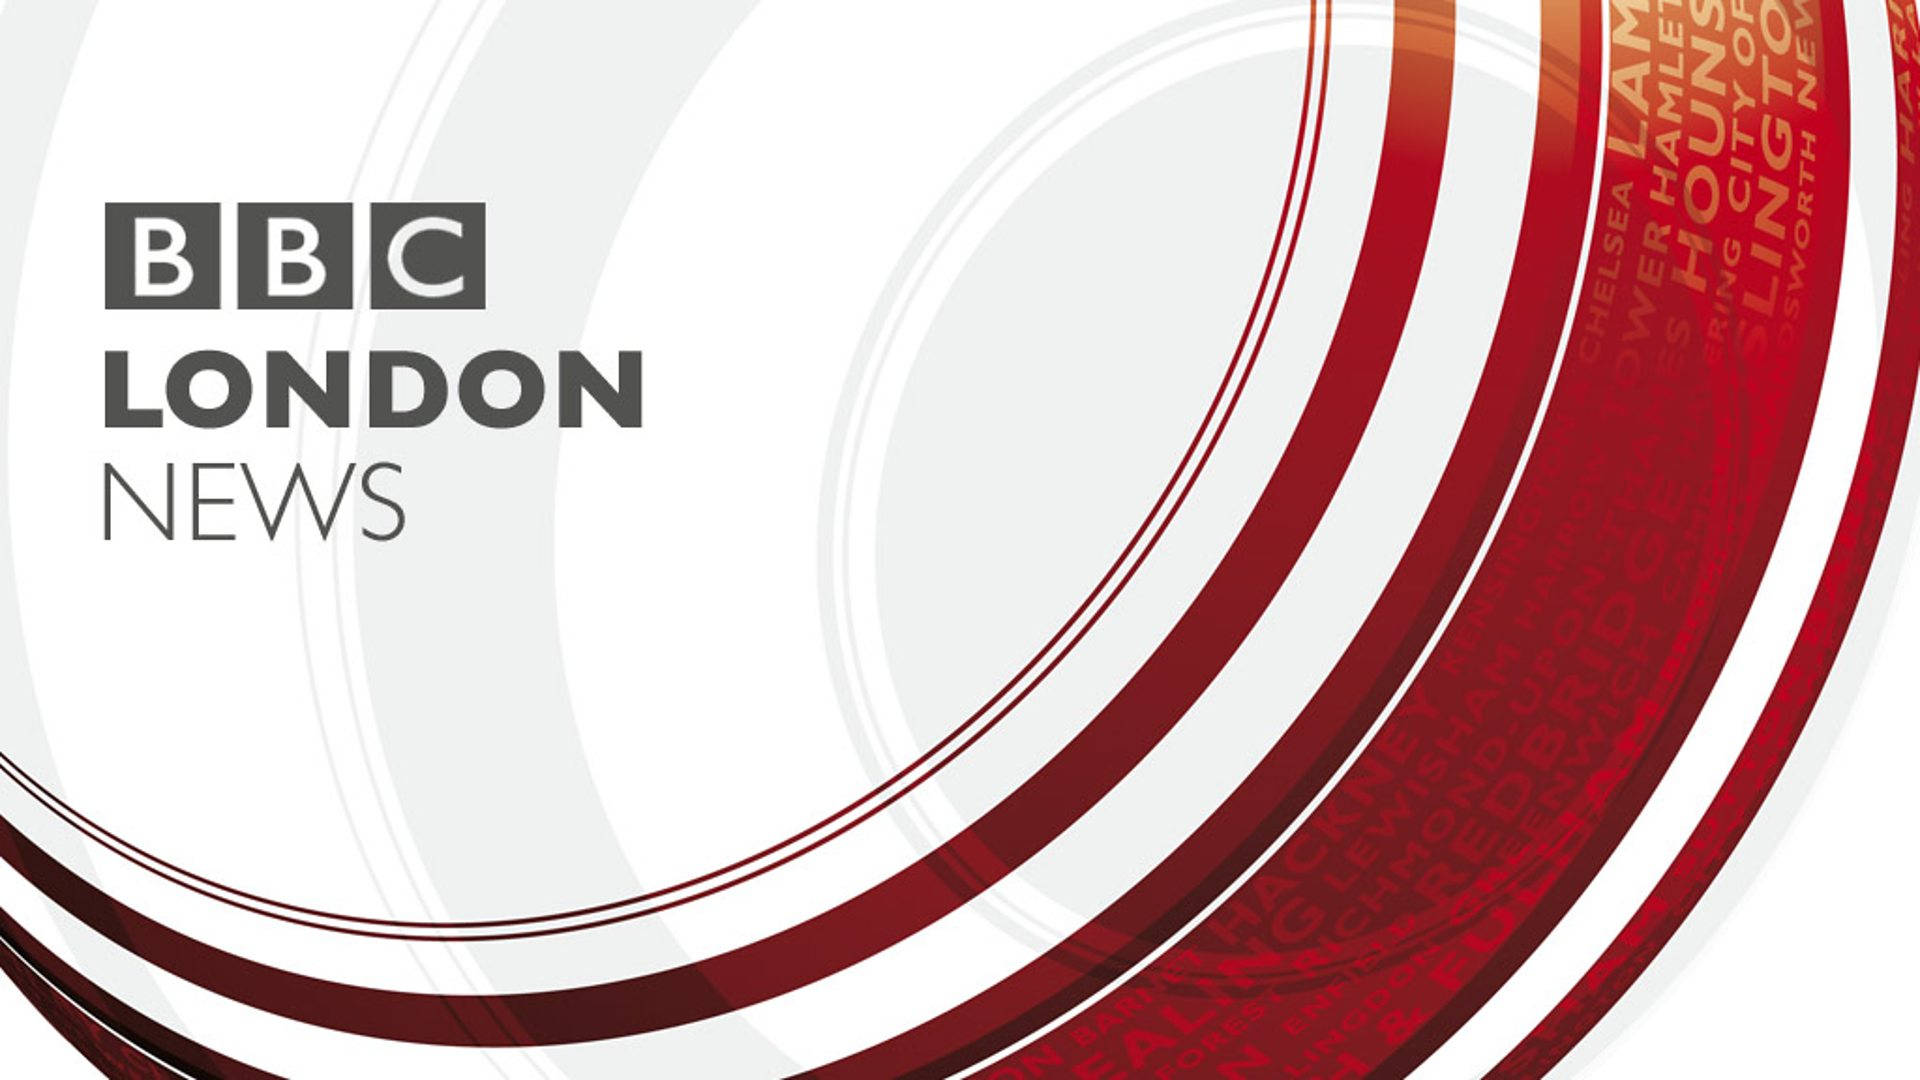 Bbcnews London Is Not A Specific Sentence Related To Computer Or Mobile Wallpaper. However, If You Would Like A Translation Related To Wallpaper, Please Provide A Specific Sentence Or Phrase. Wallpaper